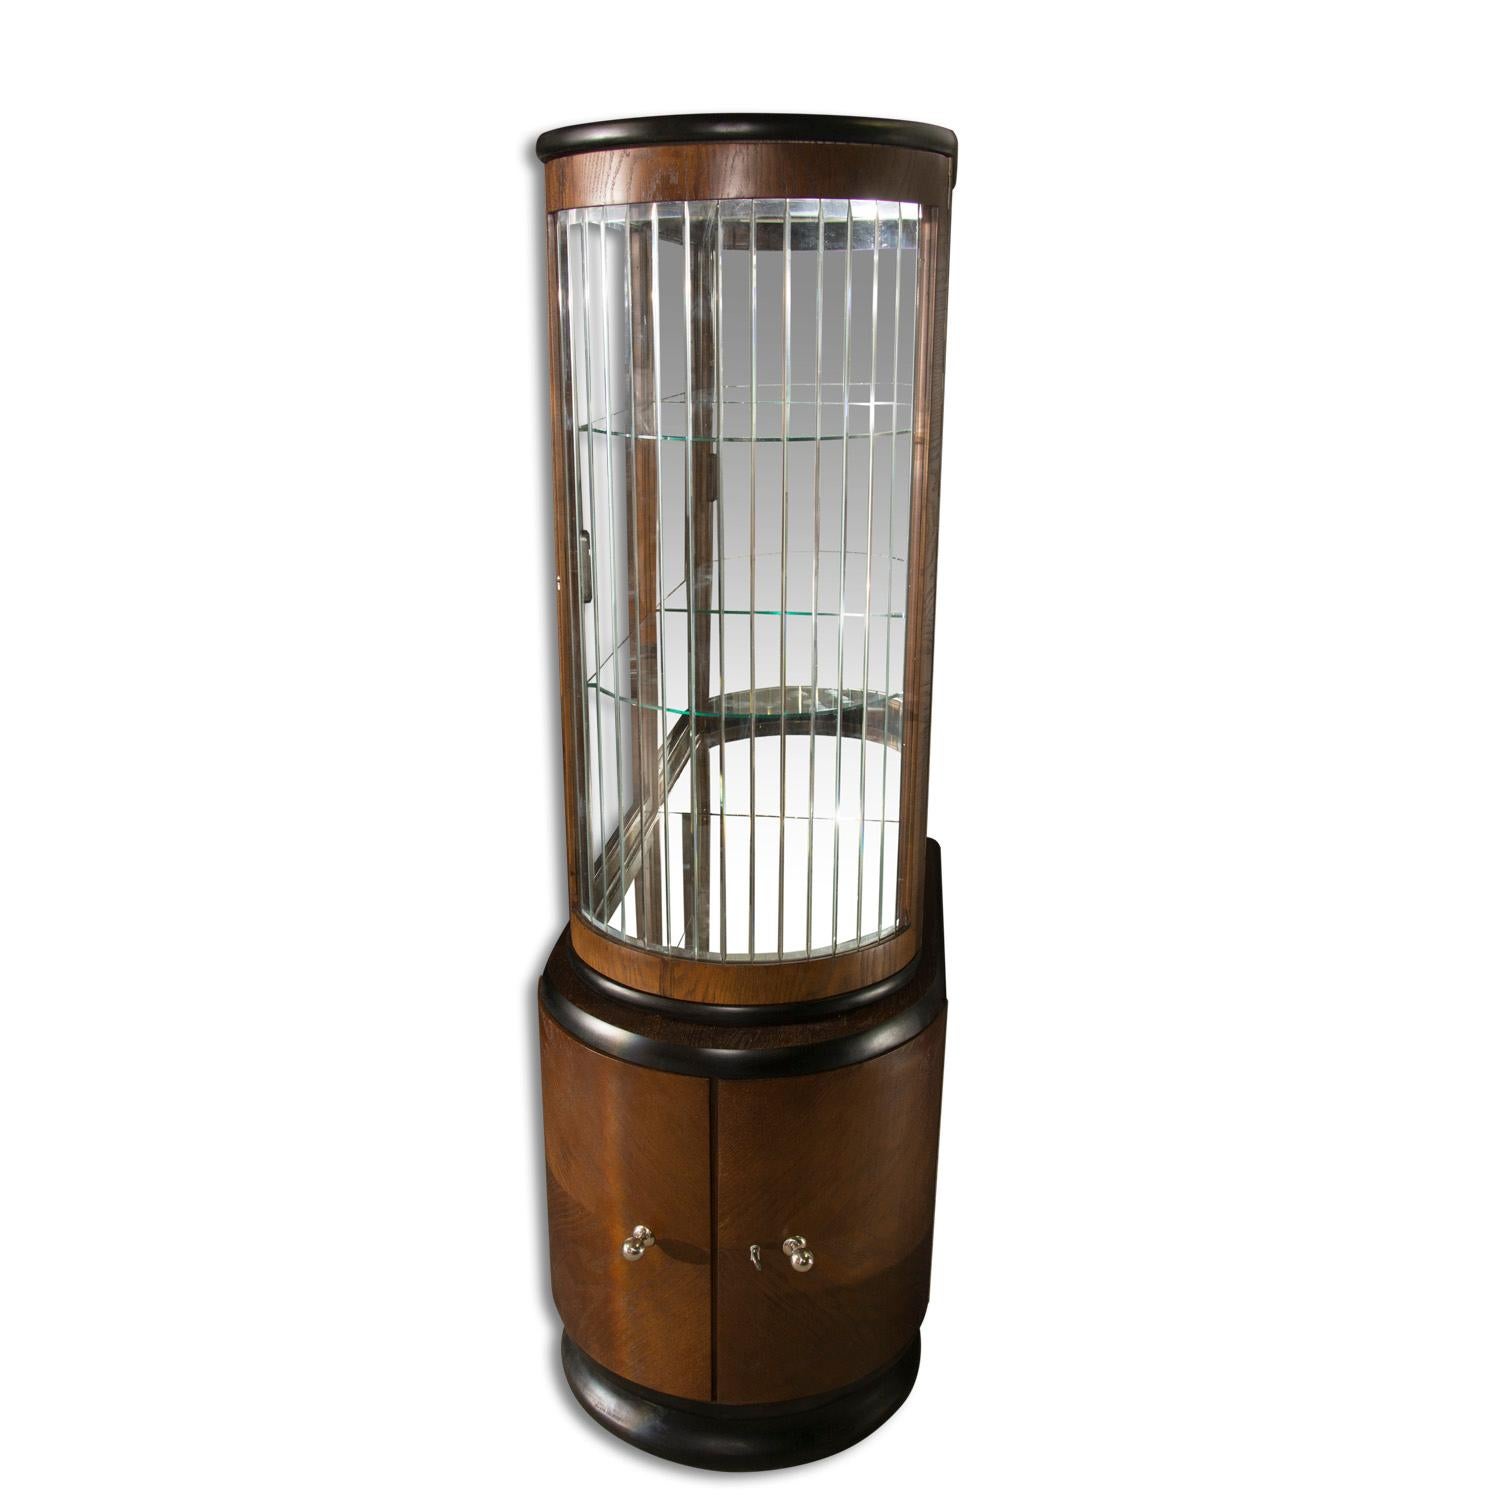 This narrow Art Deco liquor cabinet was made in Bohemia in the 1930s. It´s constructed in solid wood and veneer in oak.
It features a narrow profile sheathed by glass.
Chromed handles and a black lacquered base and top
Cabinet is in excellent